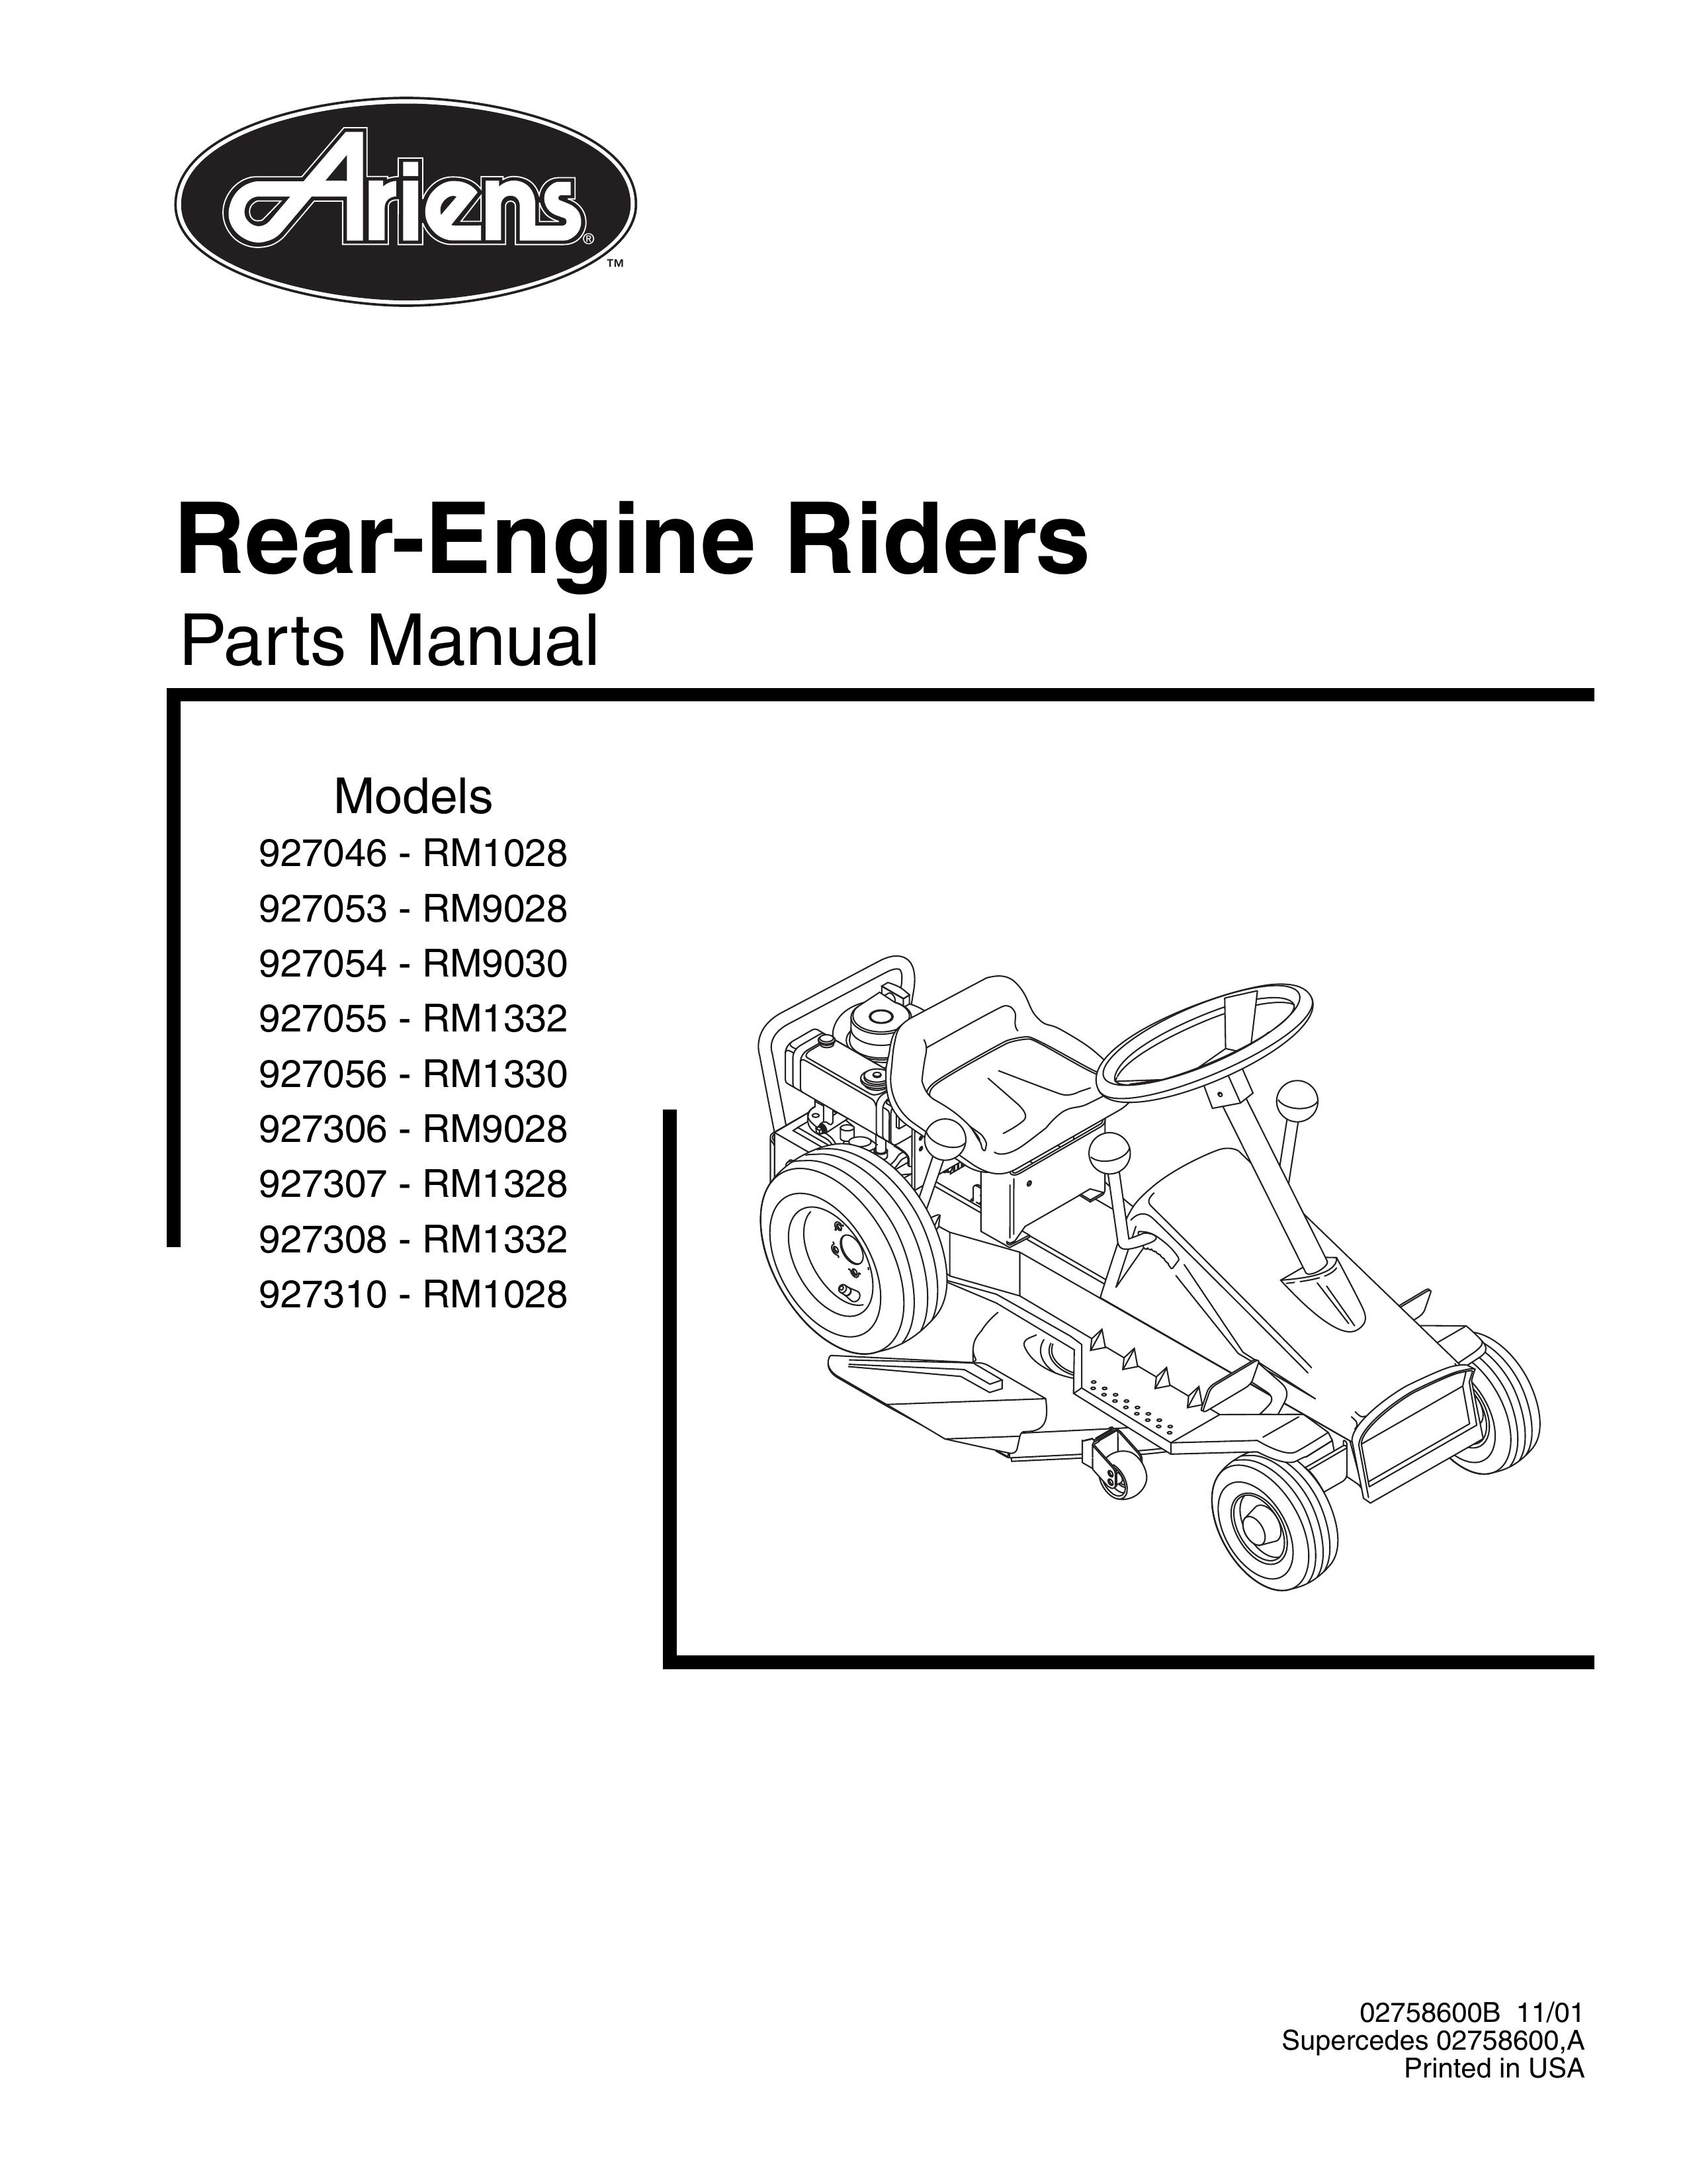 Ariens 927054 - RM9030 Camcorder User Manual (Page 1)